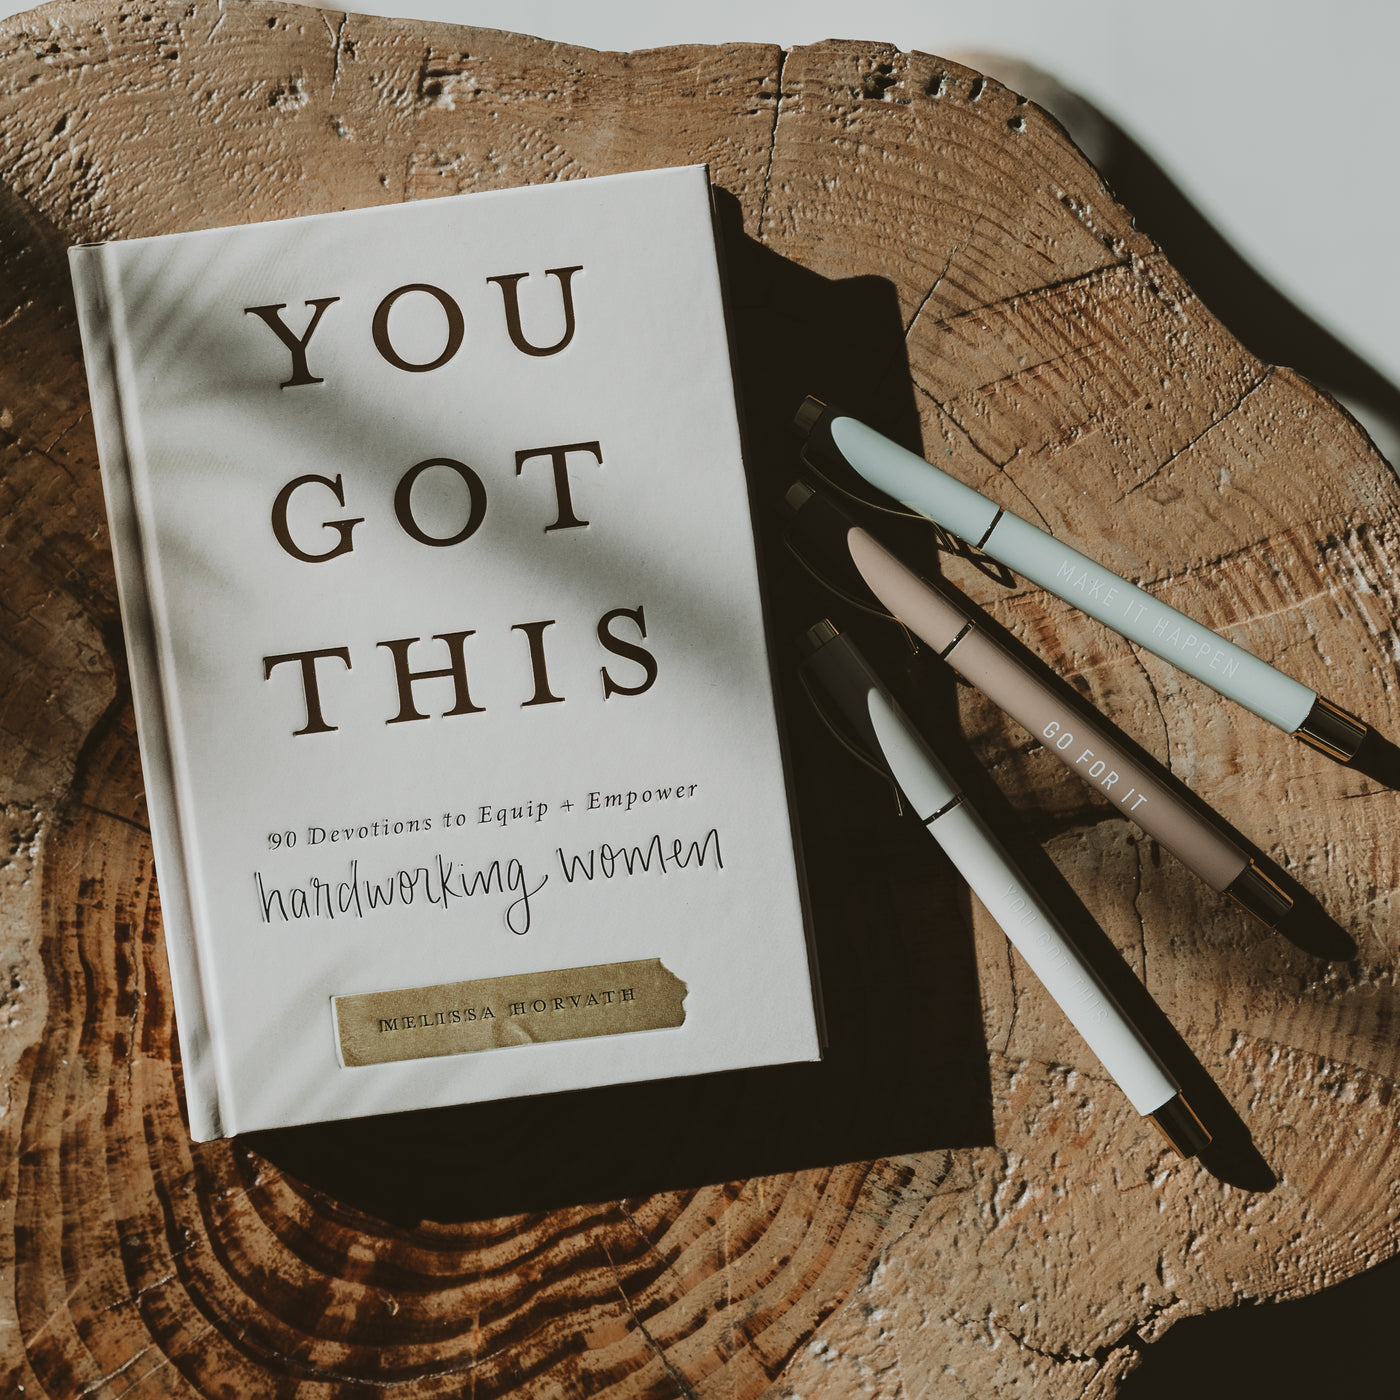 YOU GOT THIS: 90 DEVOTIONS TO EMPOWER HARD WORKING WOMEN